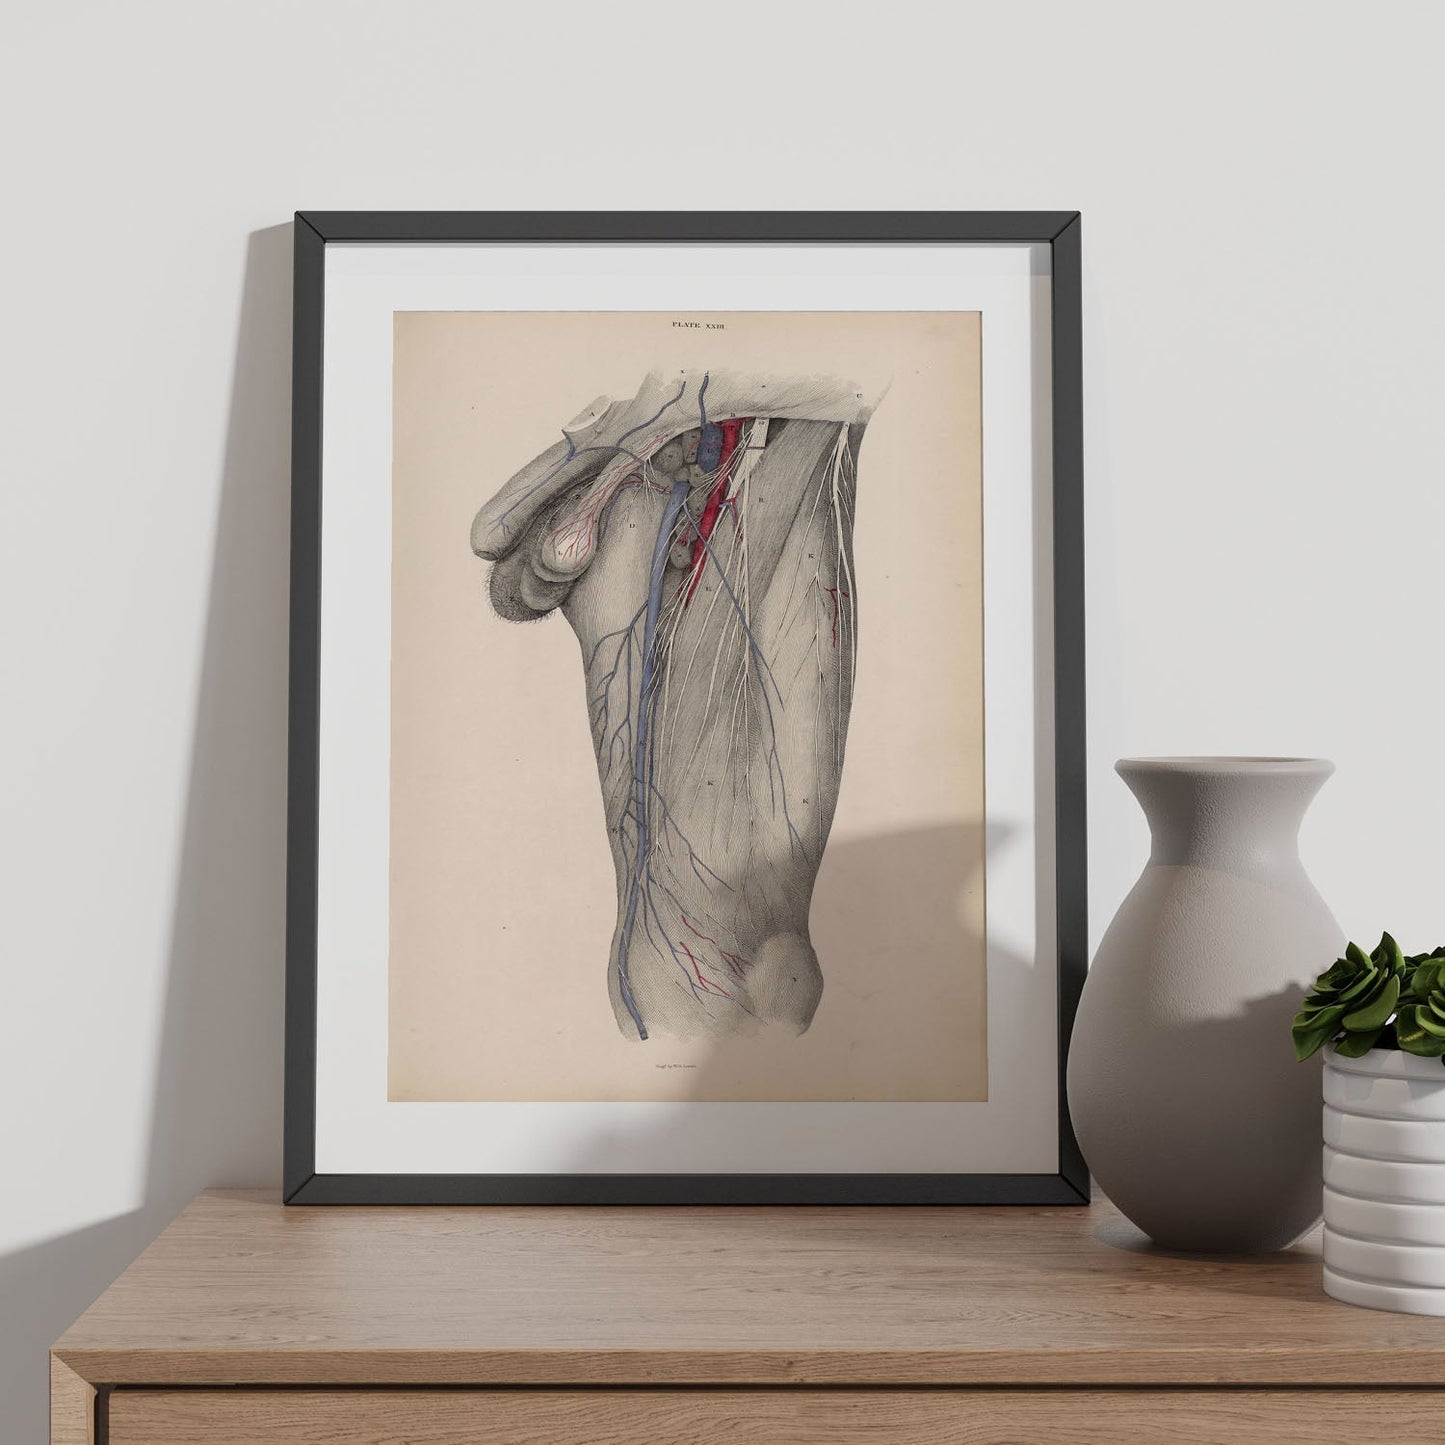 Dissection of the groin Deep dissection of femoral triangle-Artwork-Nacnic-Nacnic Estudio SL